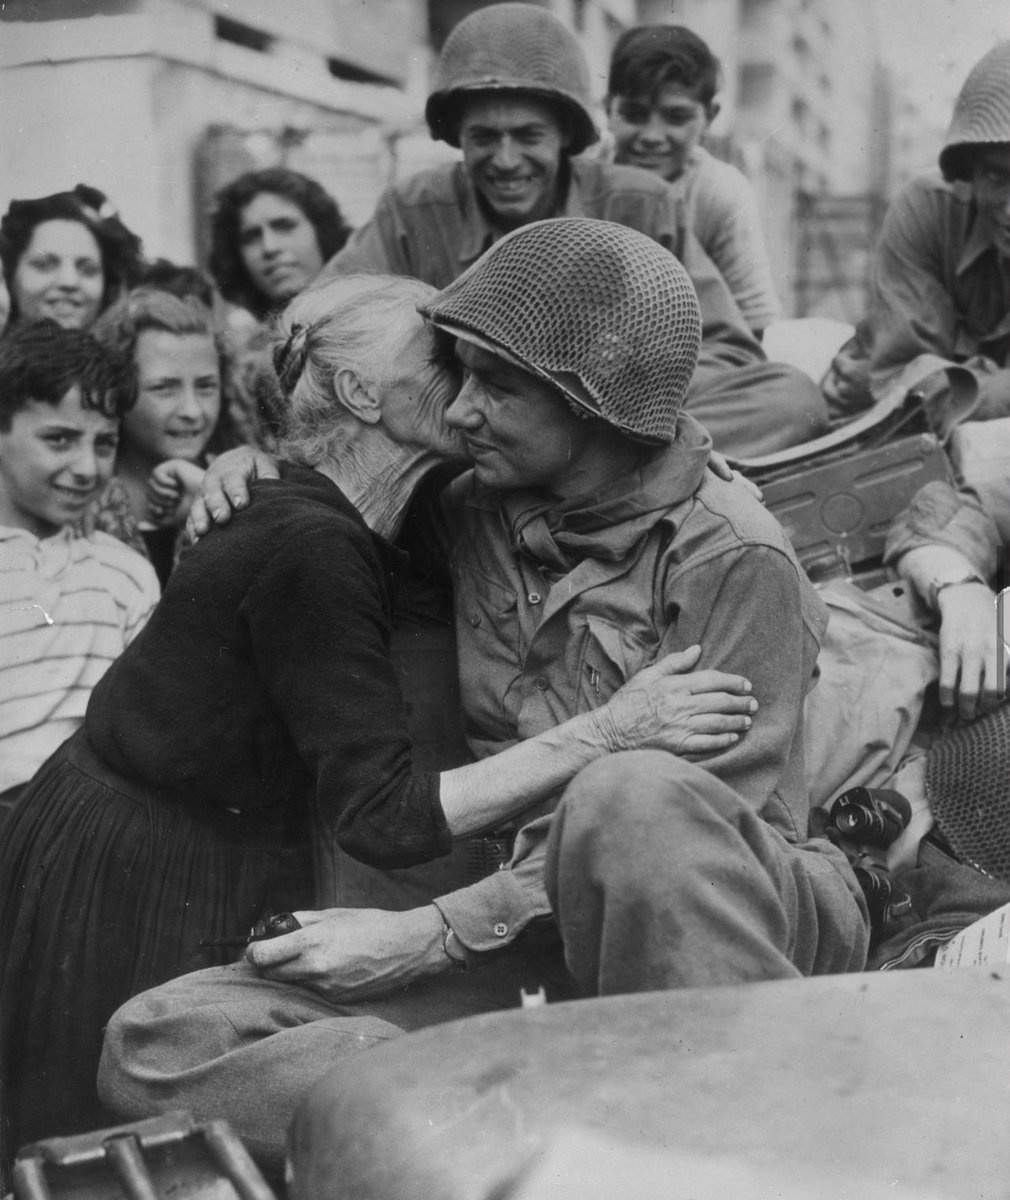 An Italian woman shows her gratitude to an American soldier following the liberation of Italy, 1945.